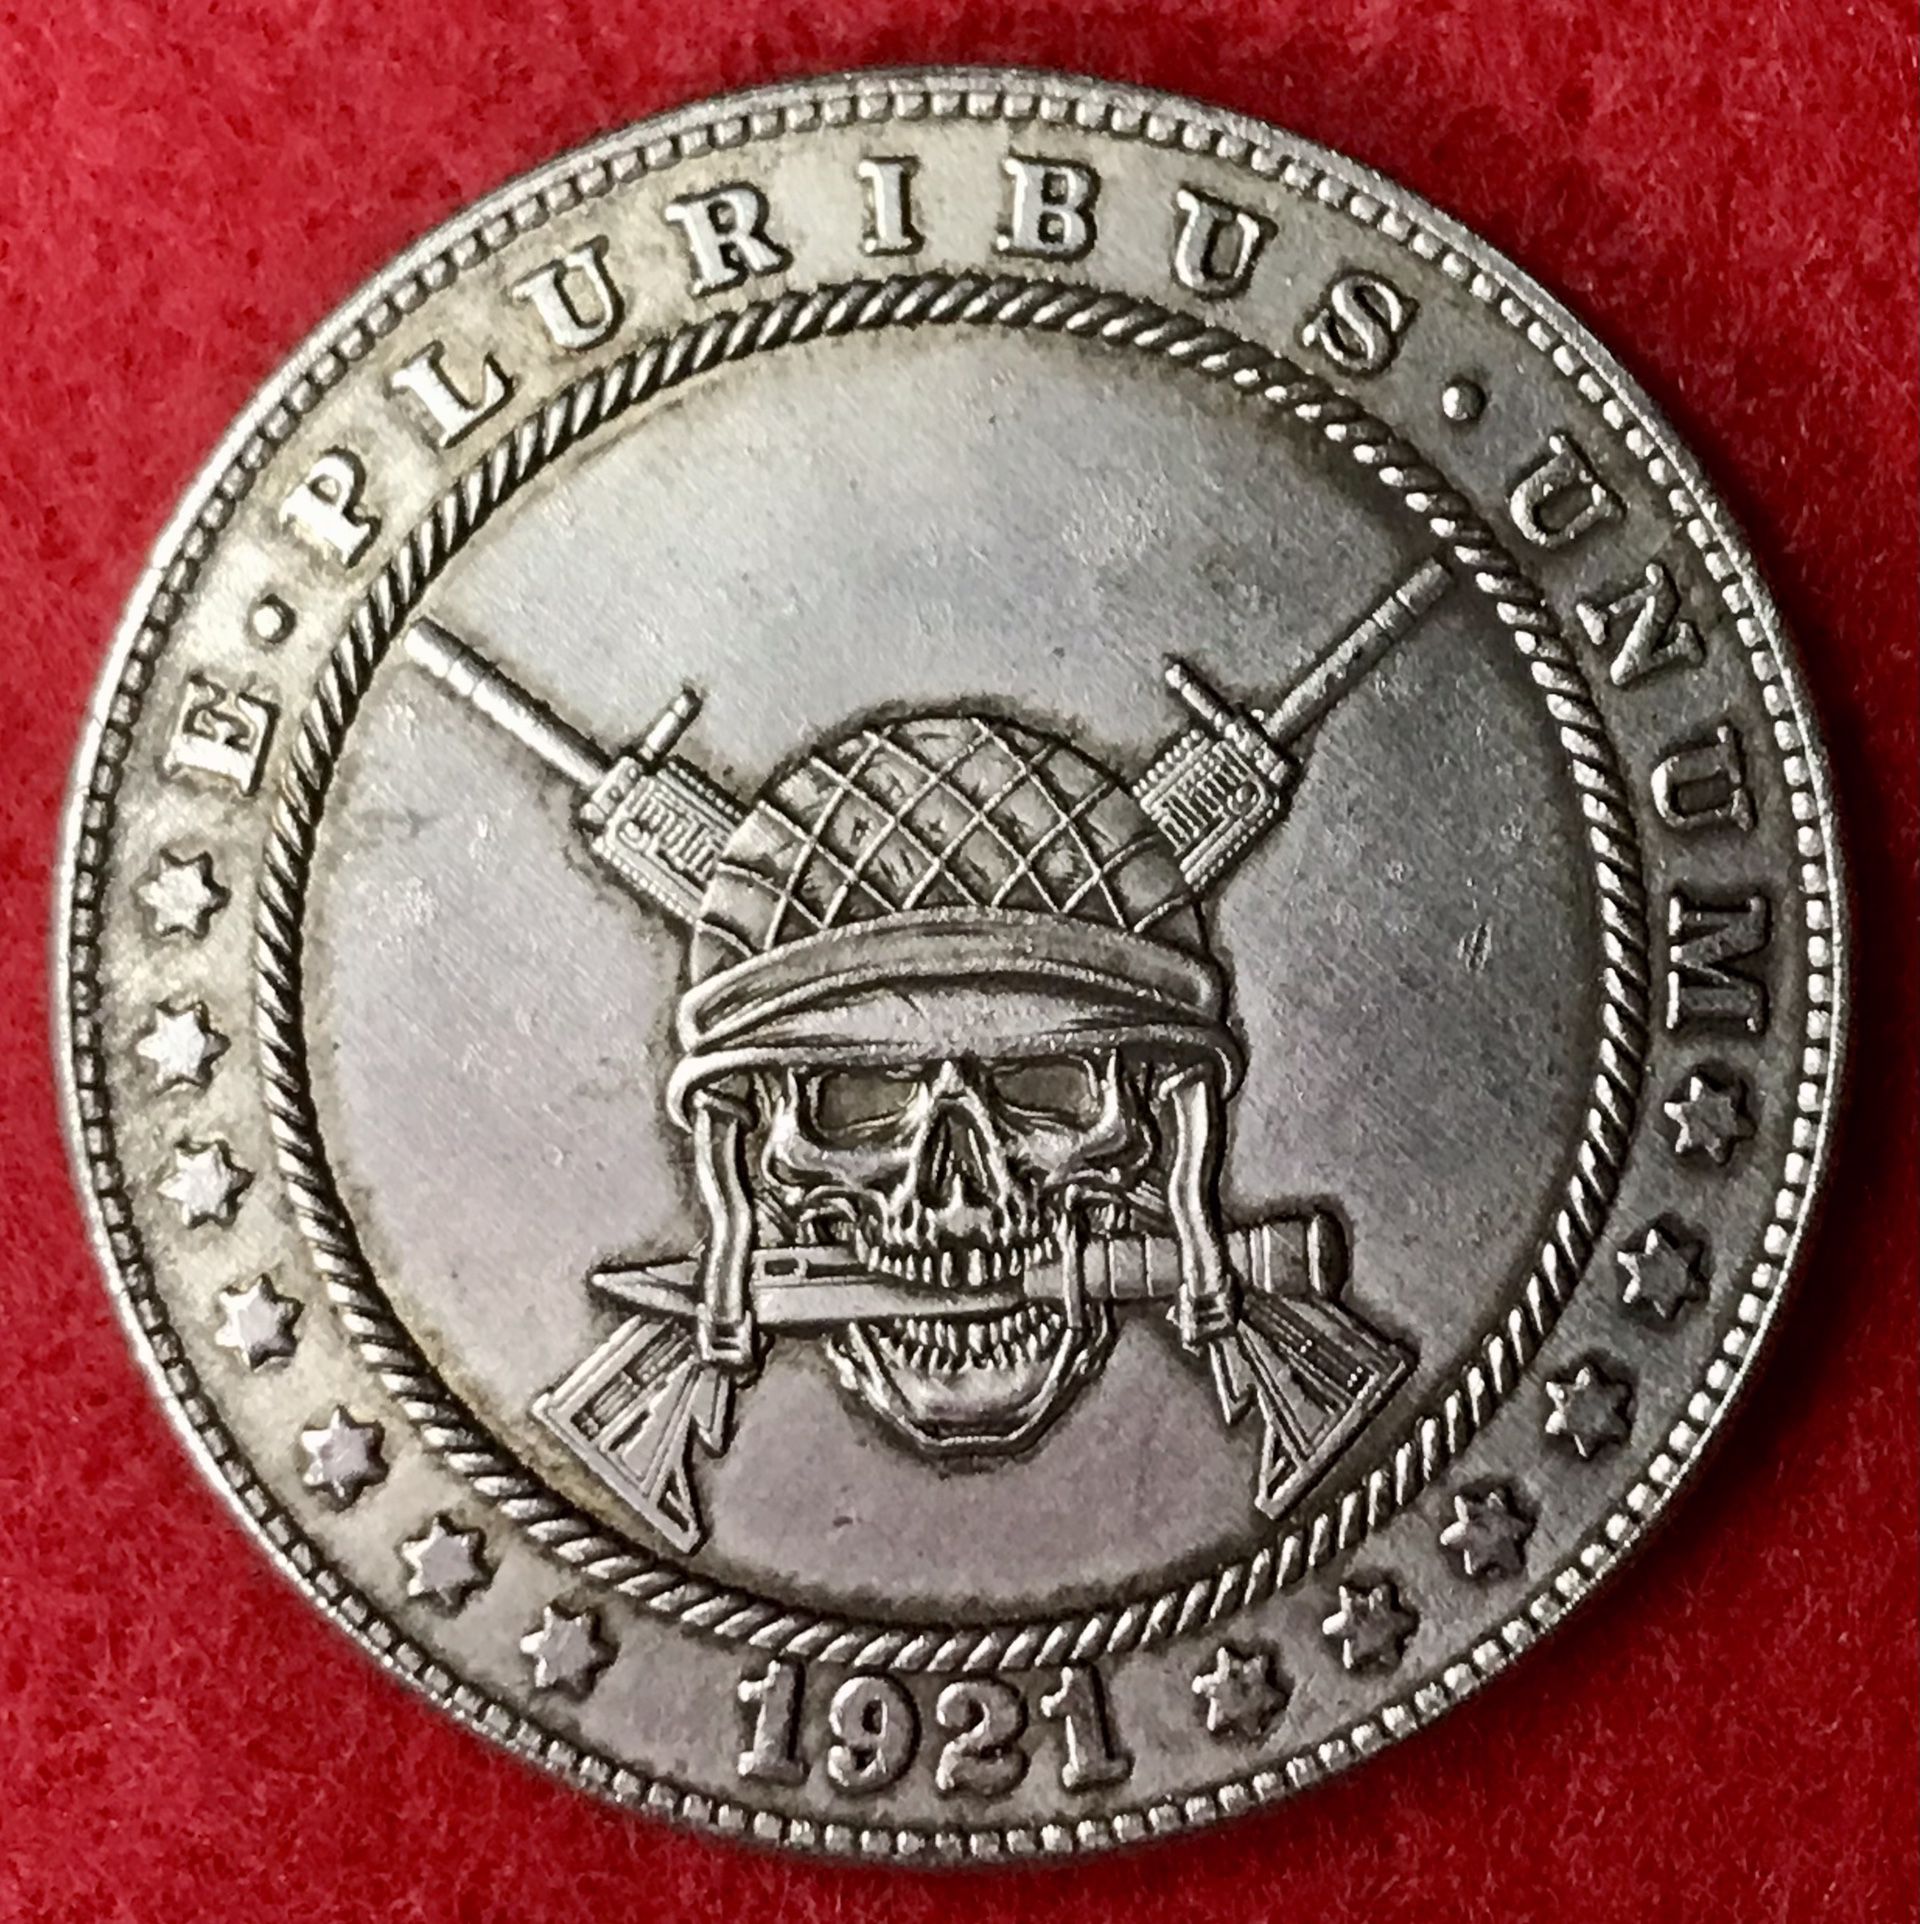 Military Skull Coin. First $20 Offer Automatically Accepted. Shipped Same Day